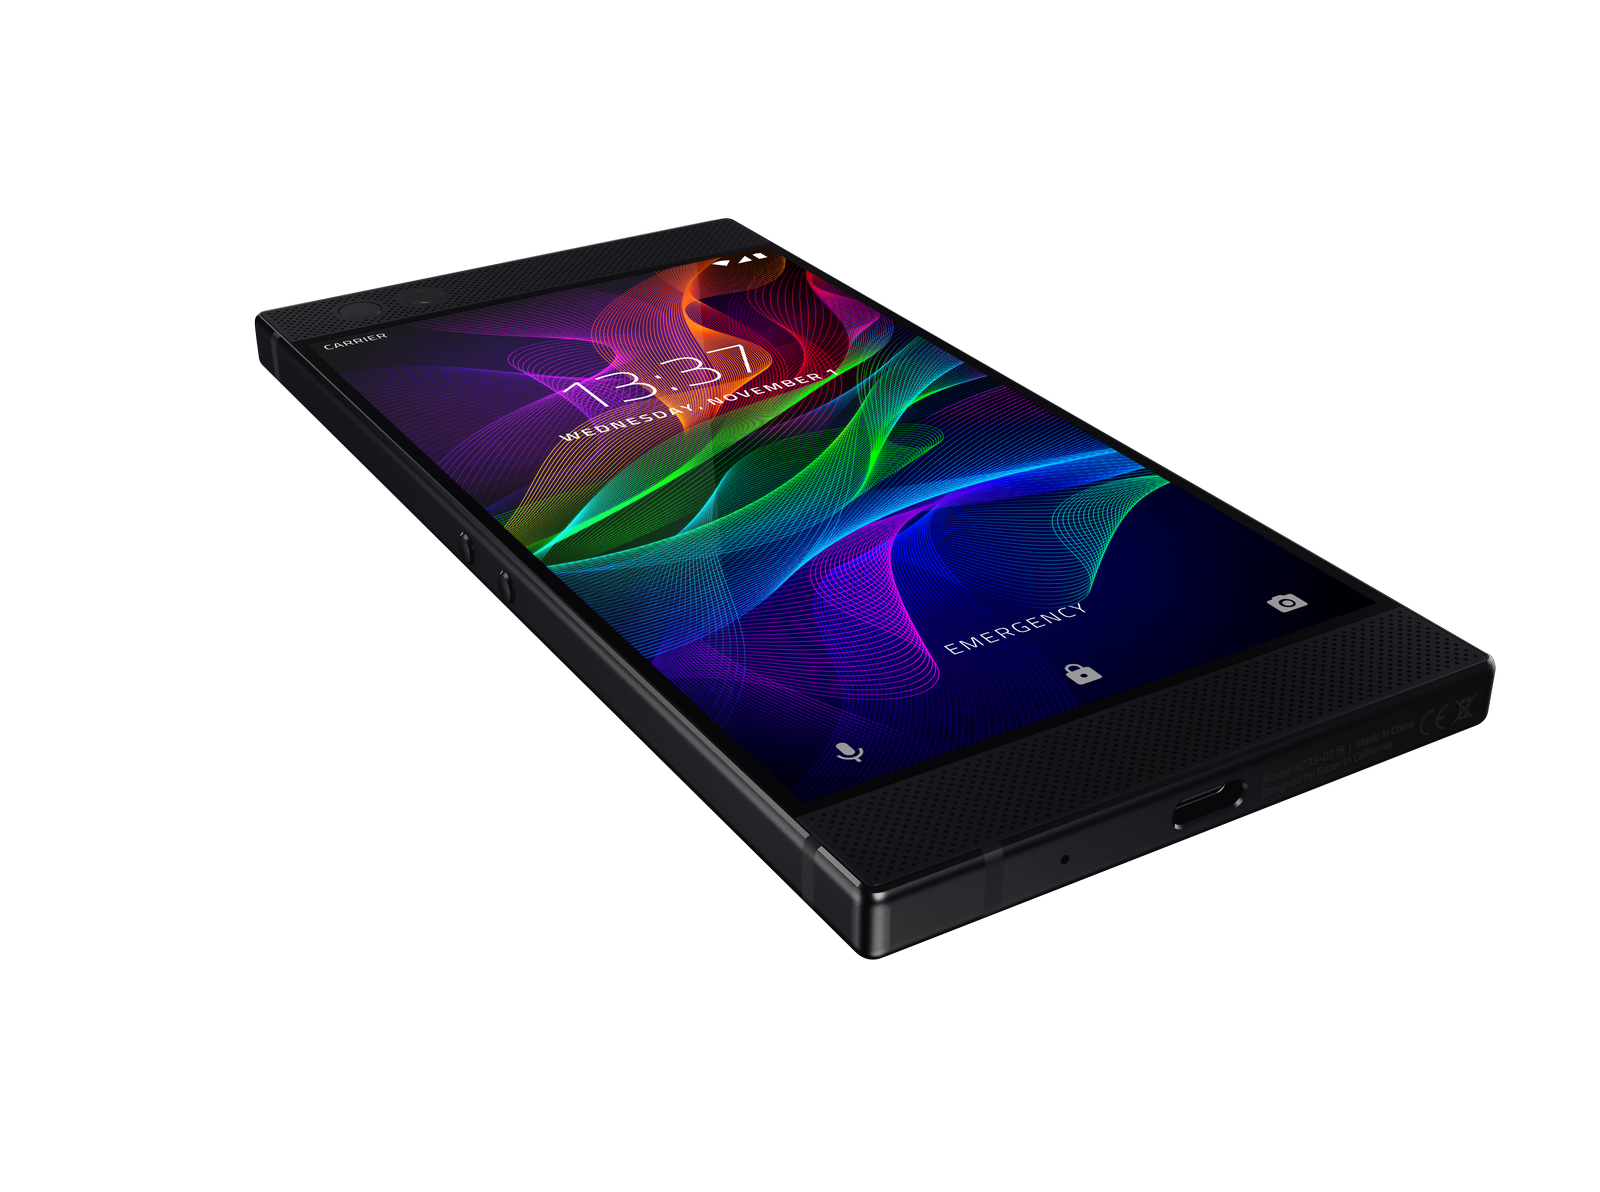 RAZER PHONE RECEIVES ANDROID 8.1 OREO UPDATE AND MORE